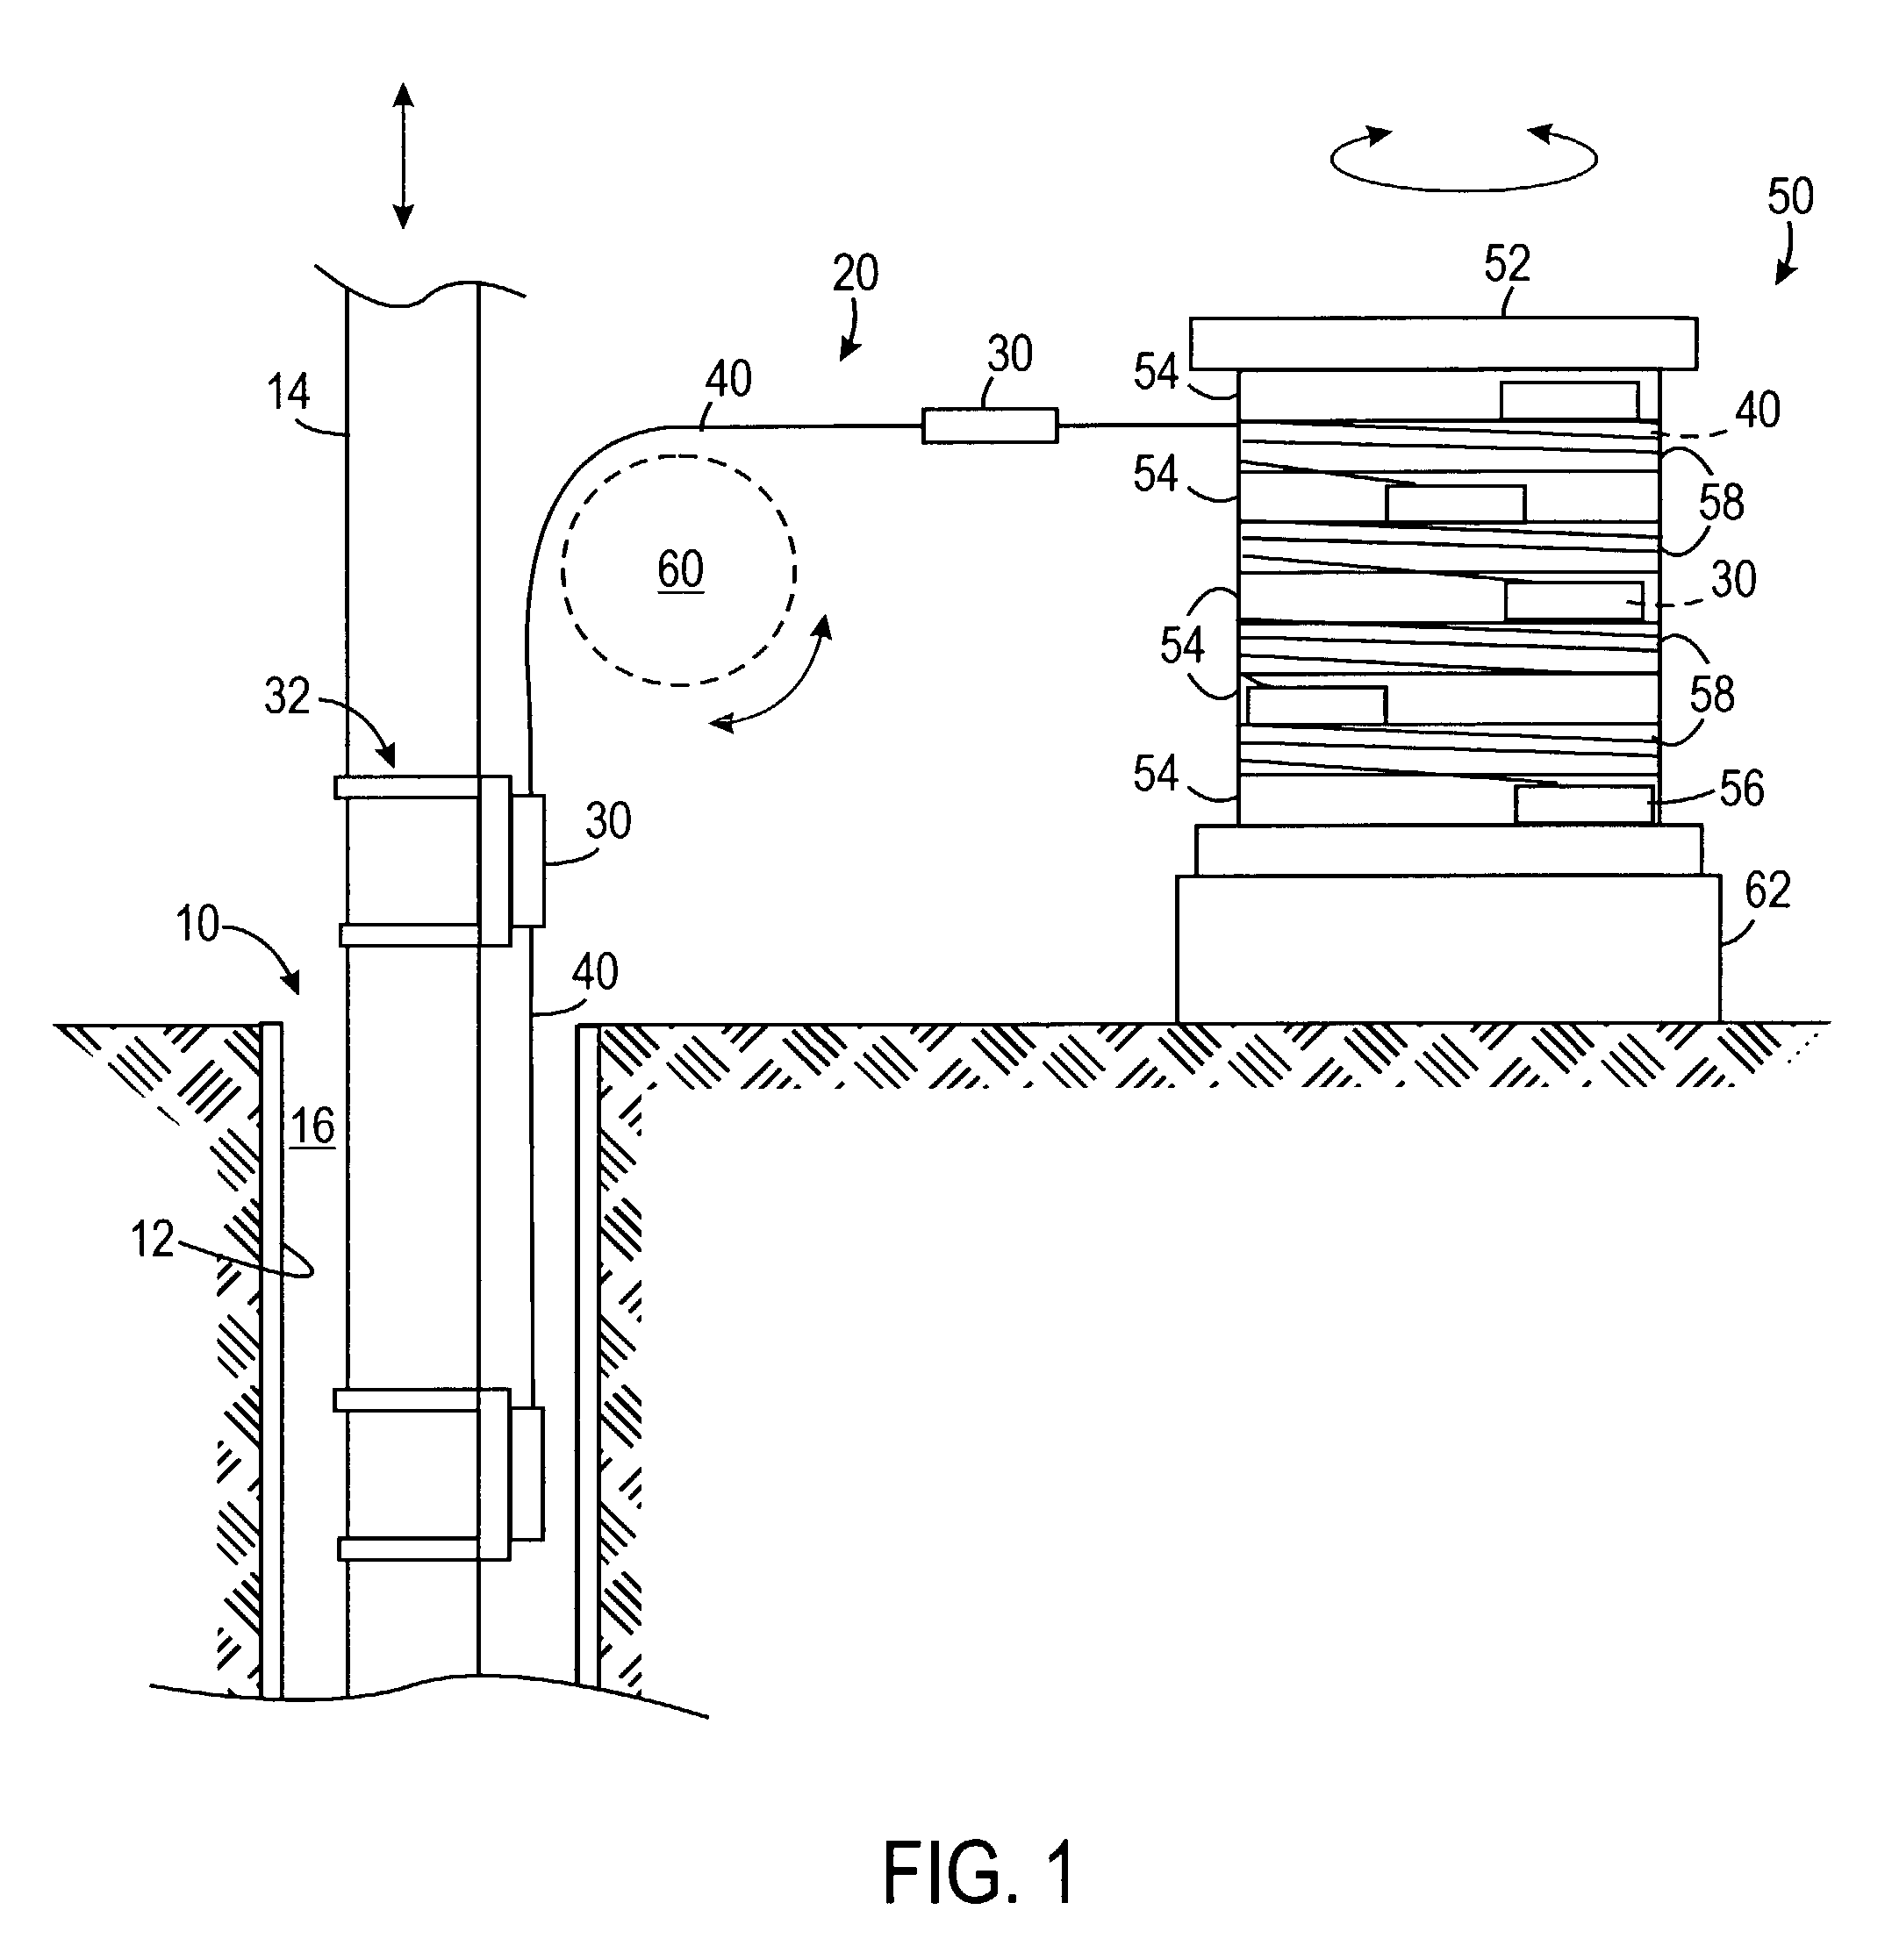 Apparatus and method for transporting, deploying, and retrieving arrays having nodes interconnected by sections of cable